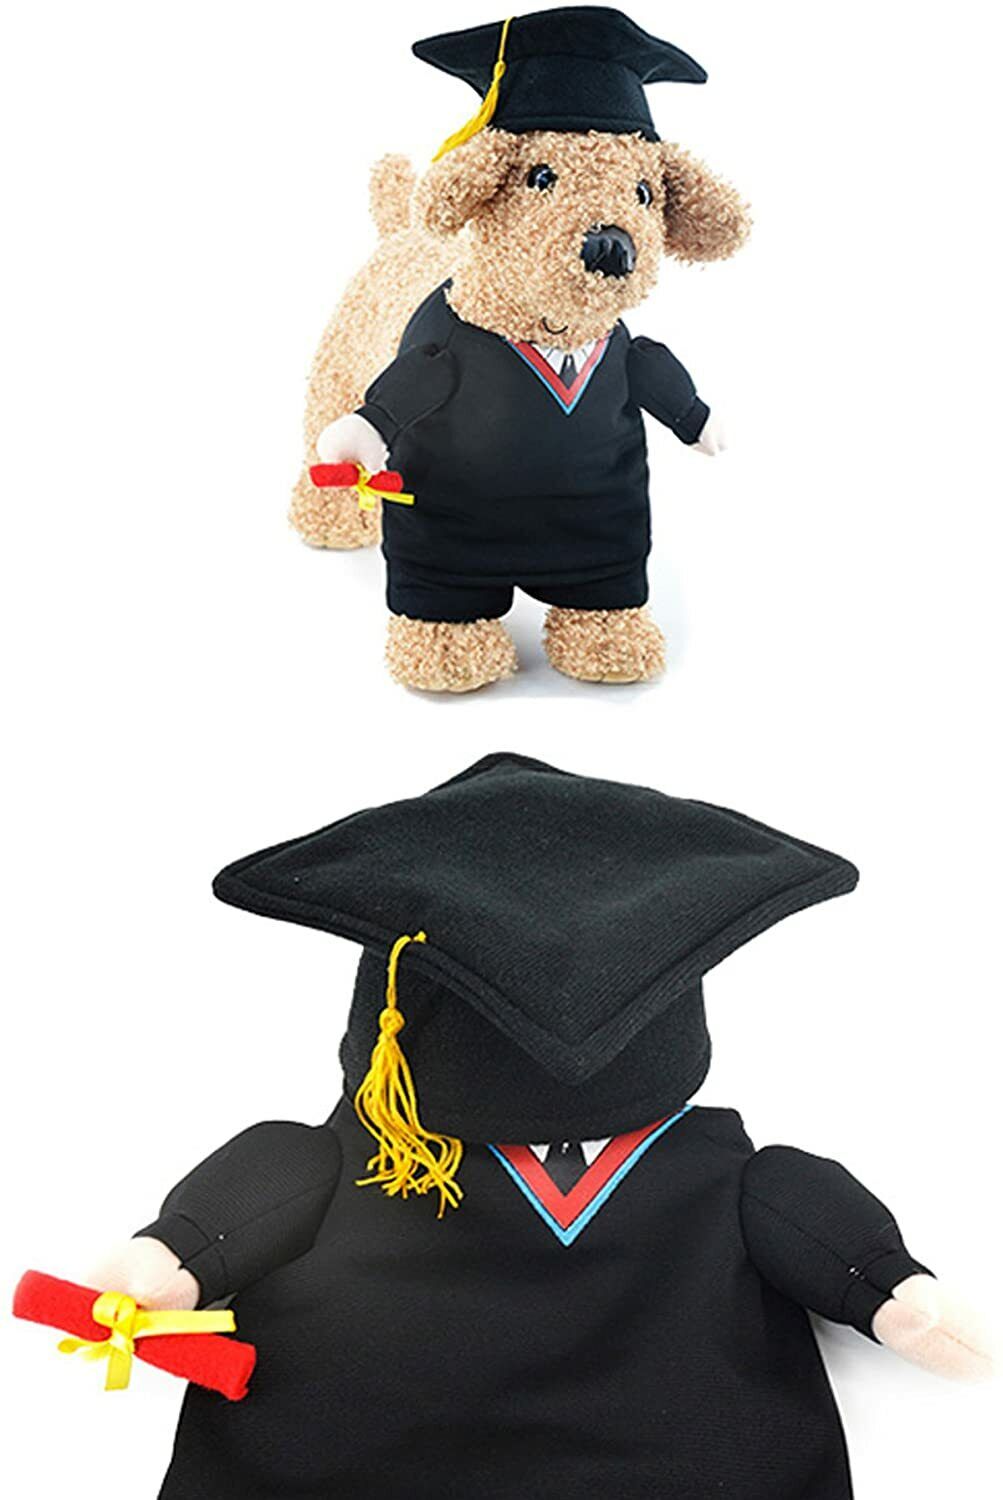 Alfie Pet - Kade The Graduate for Party Halloween Special Events Costume - Large